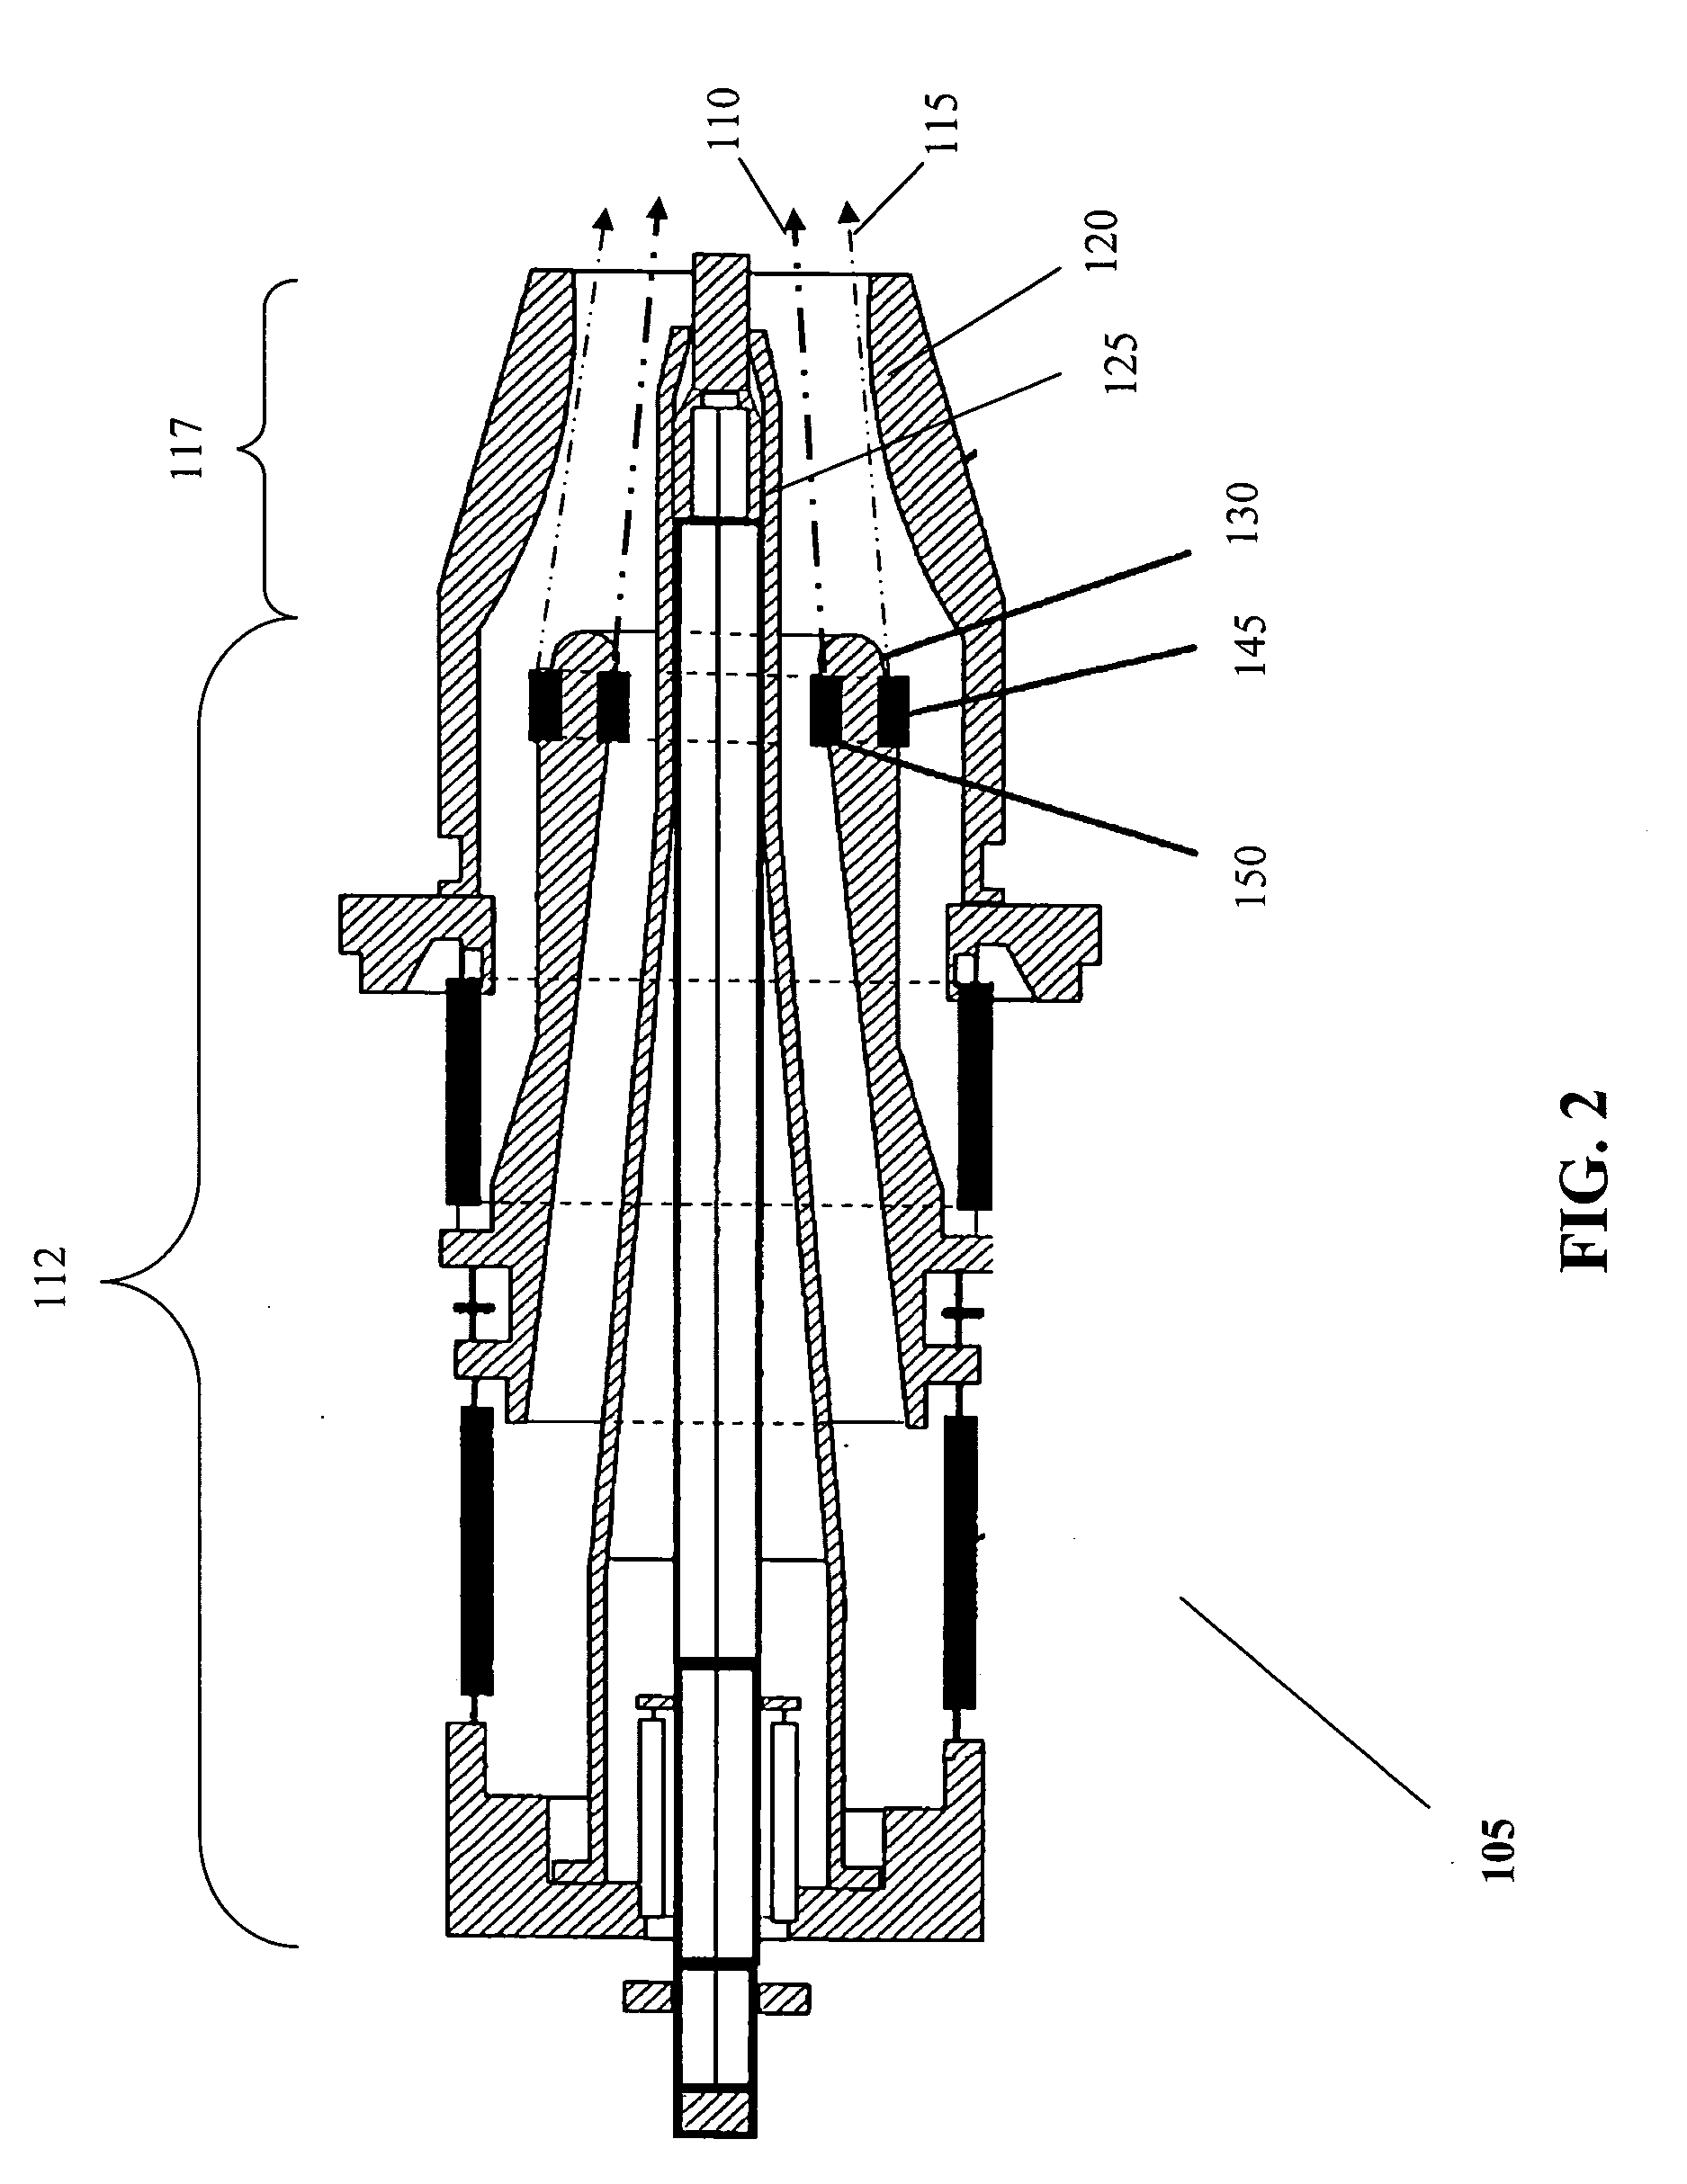 Coaxial cavity gyrotron with two electron beams